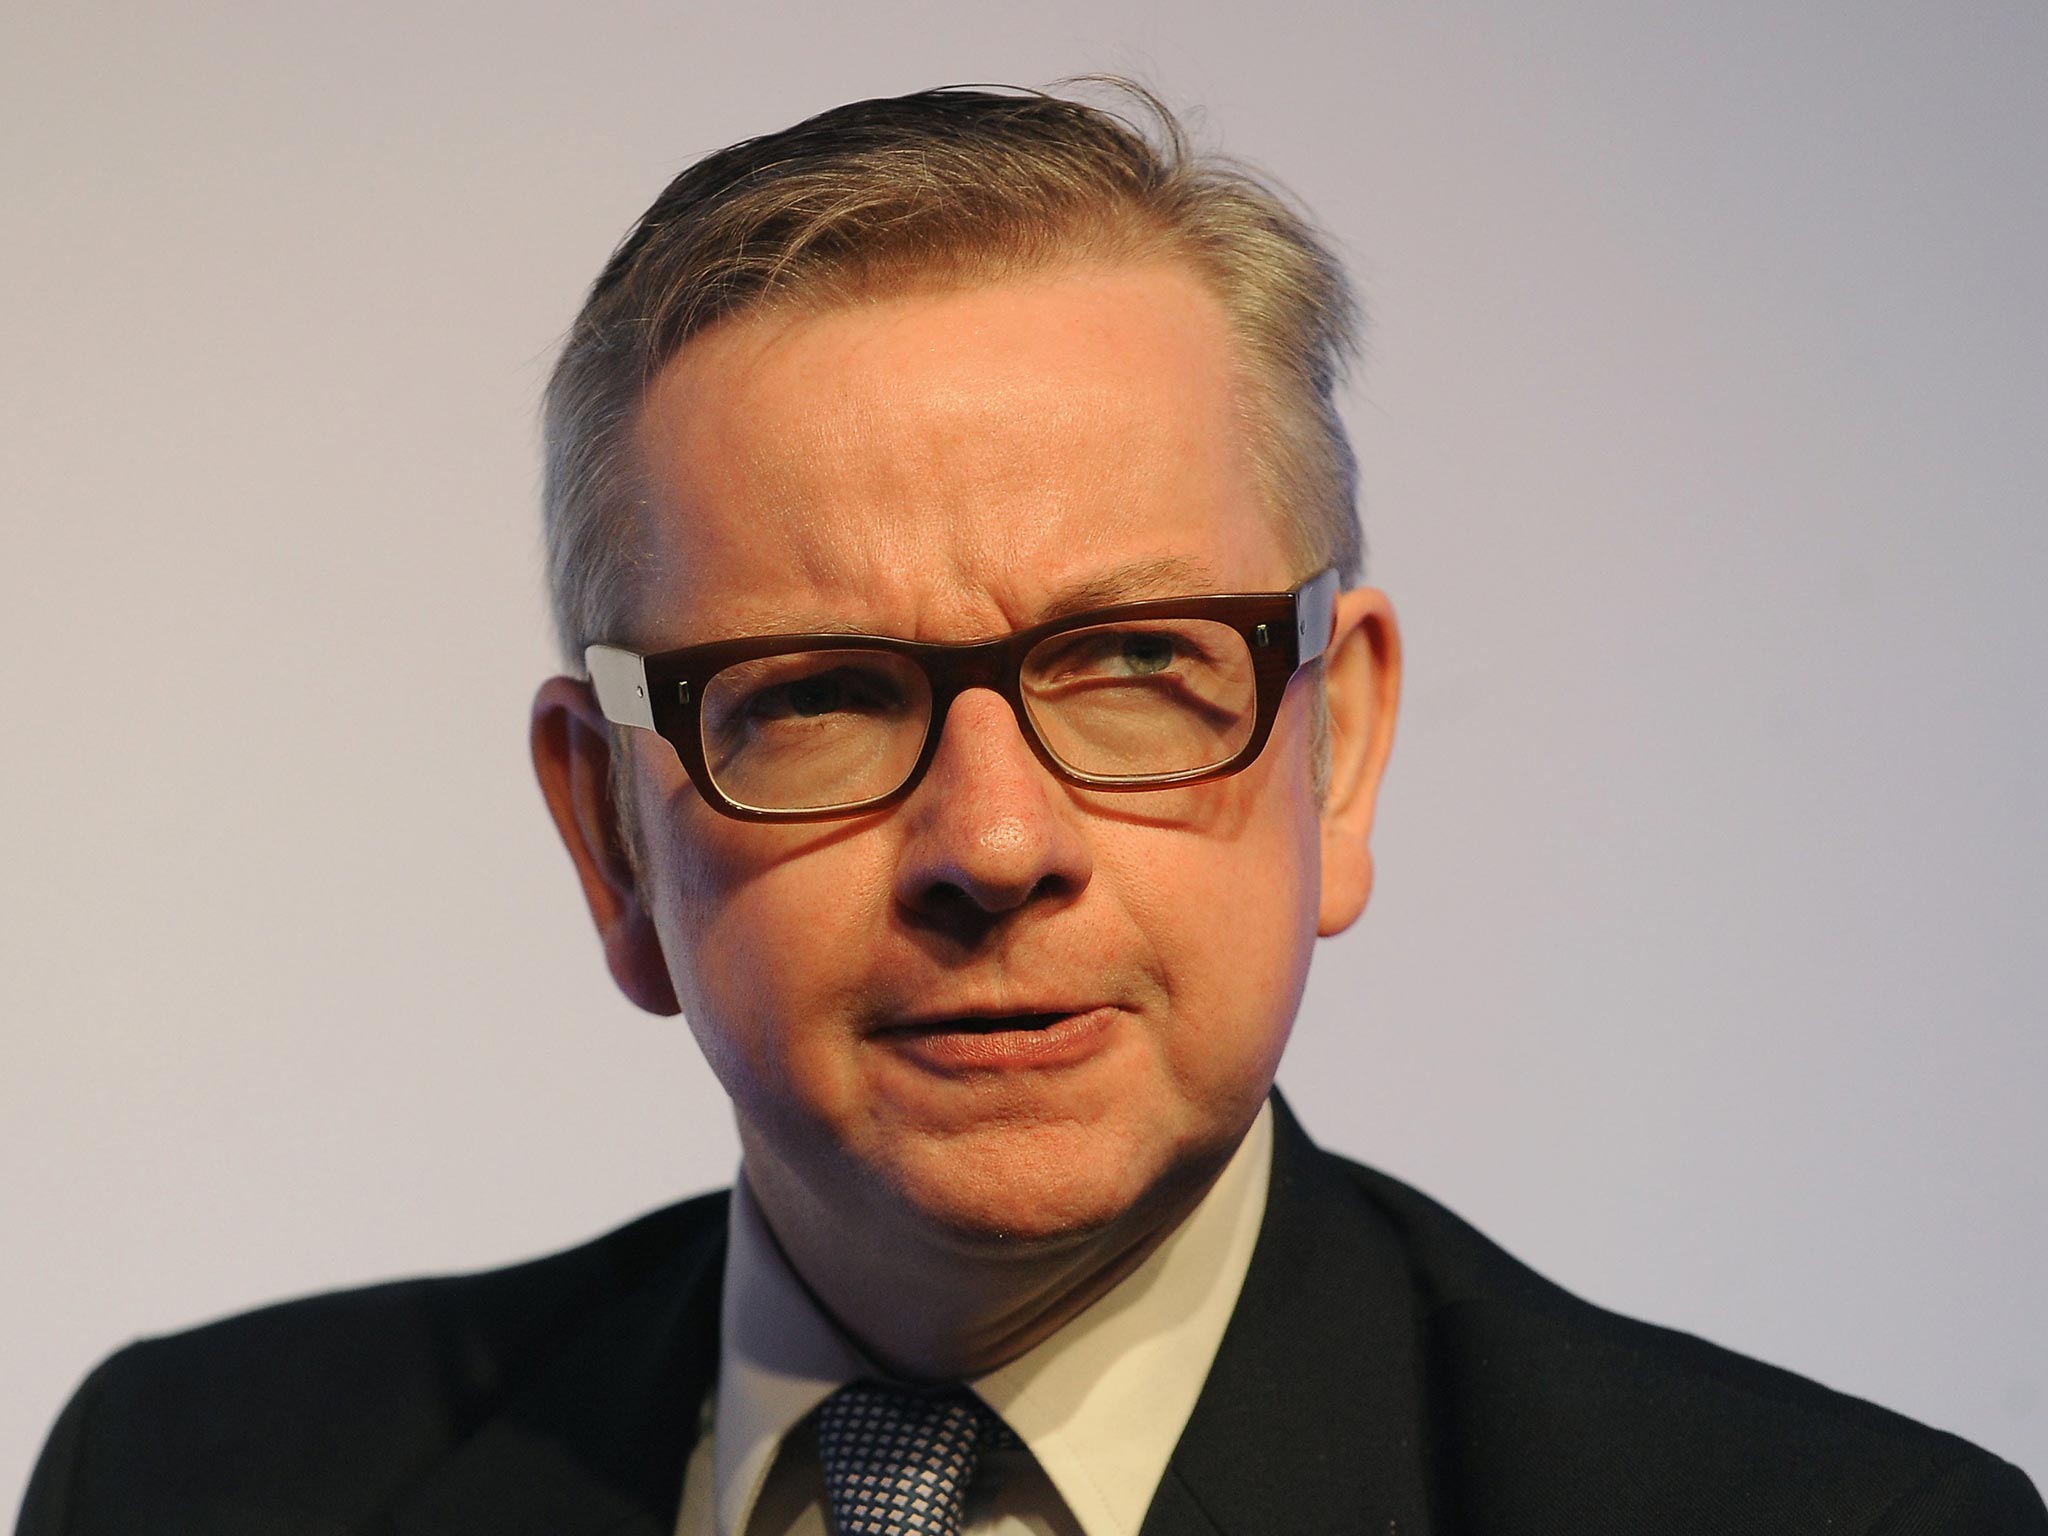 Michael Gove stressed that school governors must be prepared to take tough decisions to ensure public money is spent wisely